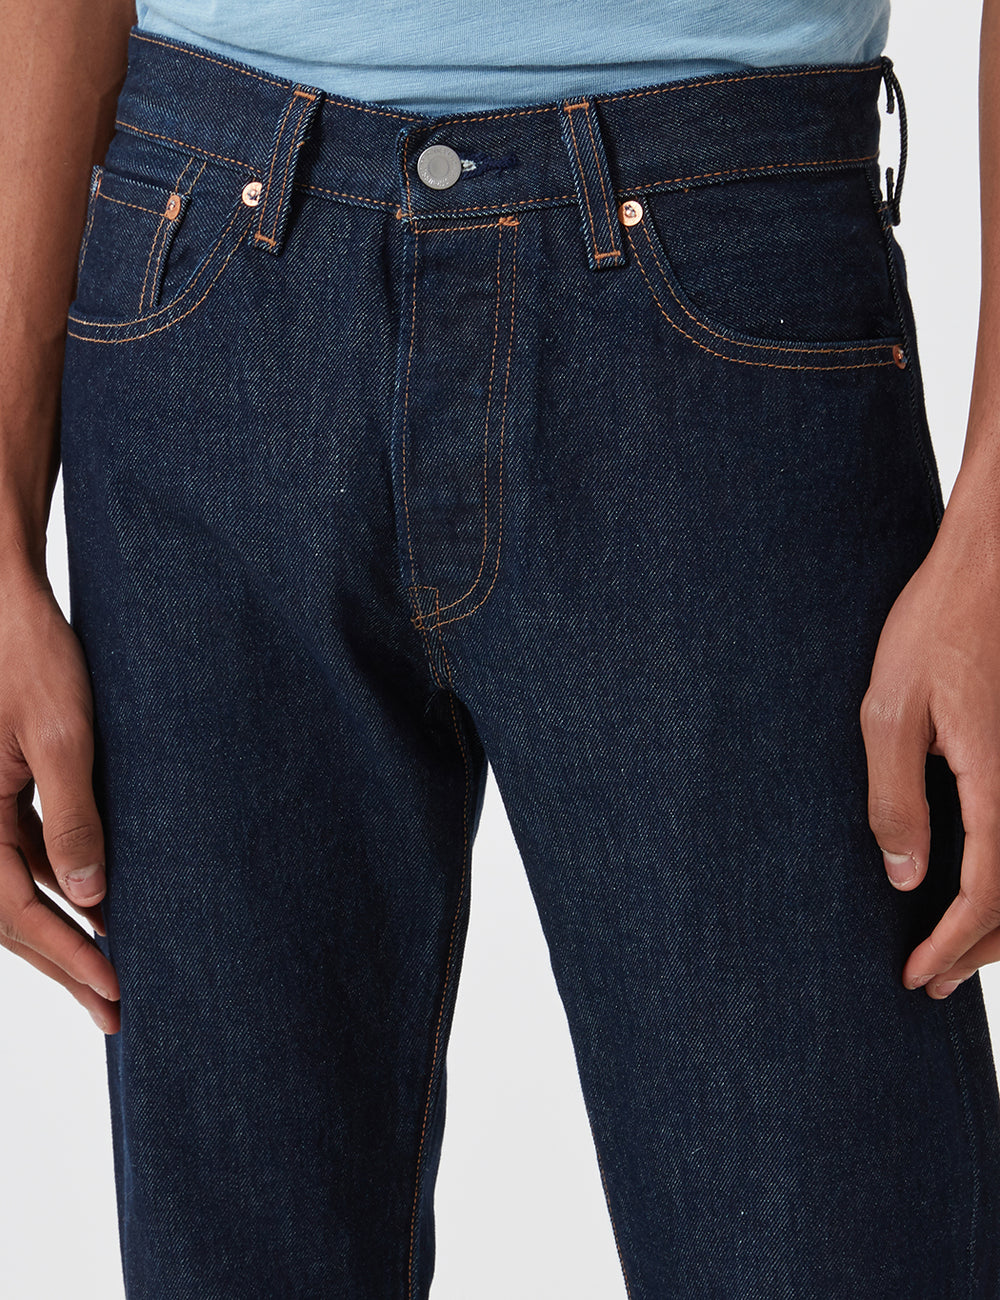 Levis Made & Crafted 501 Original Fit Jeans - Rinse | URBAN EXCESS.